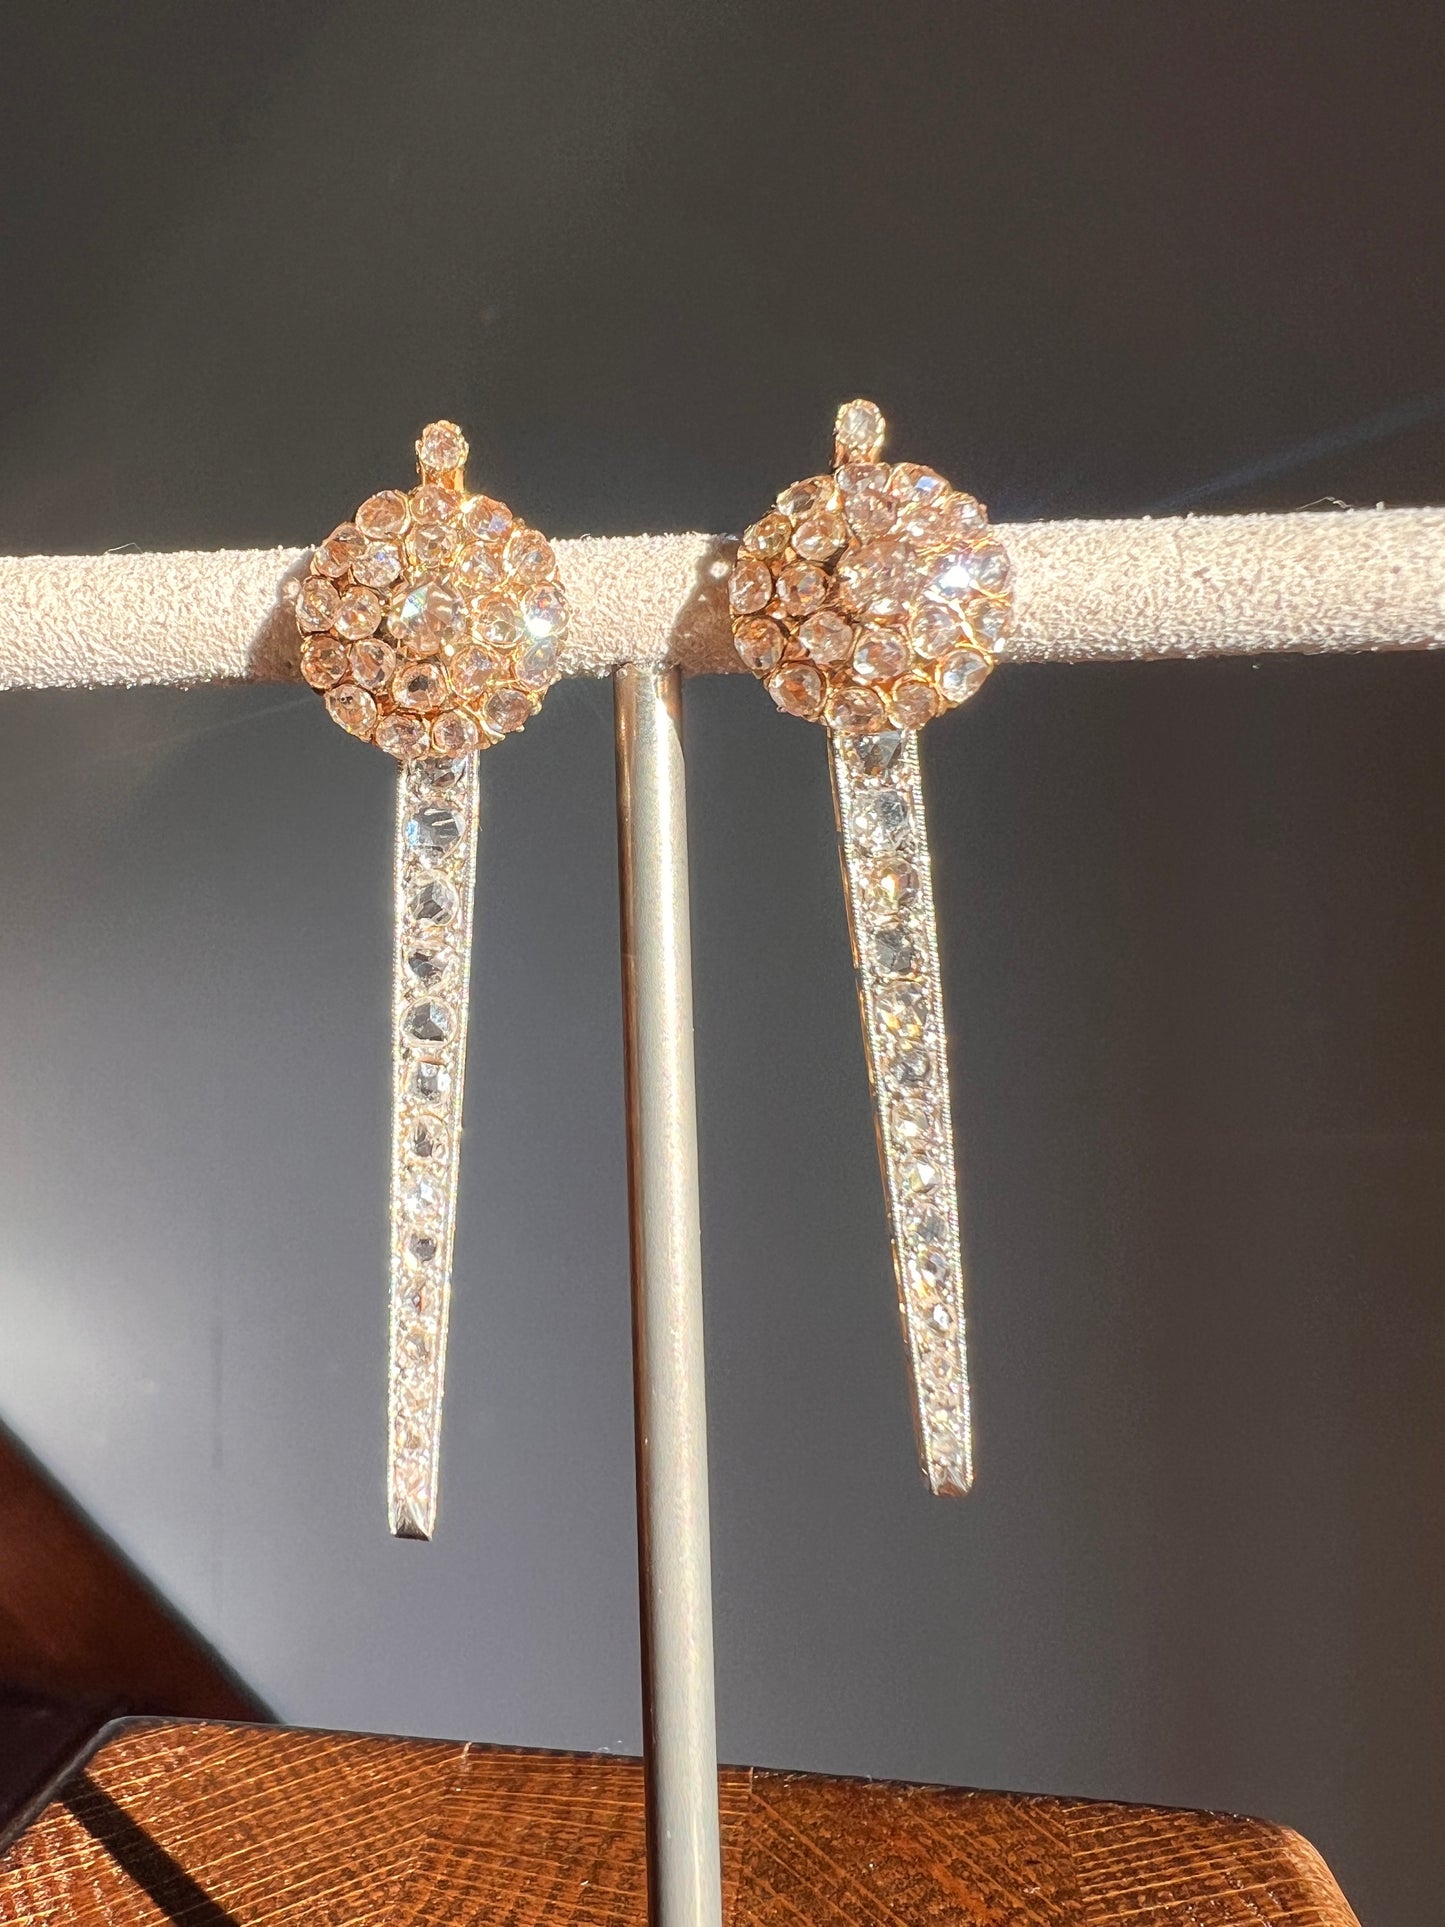 SPIKE French Antique 4 Carats 74 Rose DIAMOND Cluster Dangle Earrings 18k Gold 2.4" LONG Drop Rare